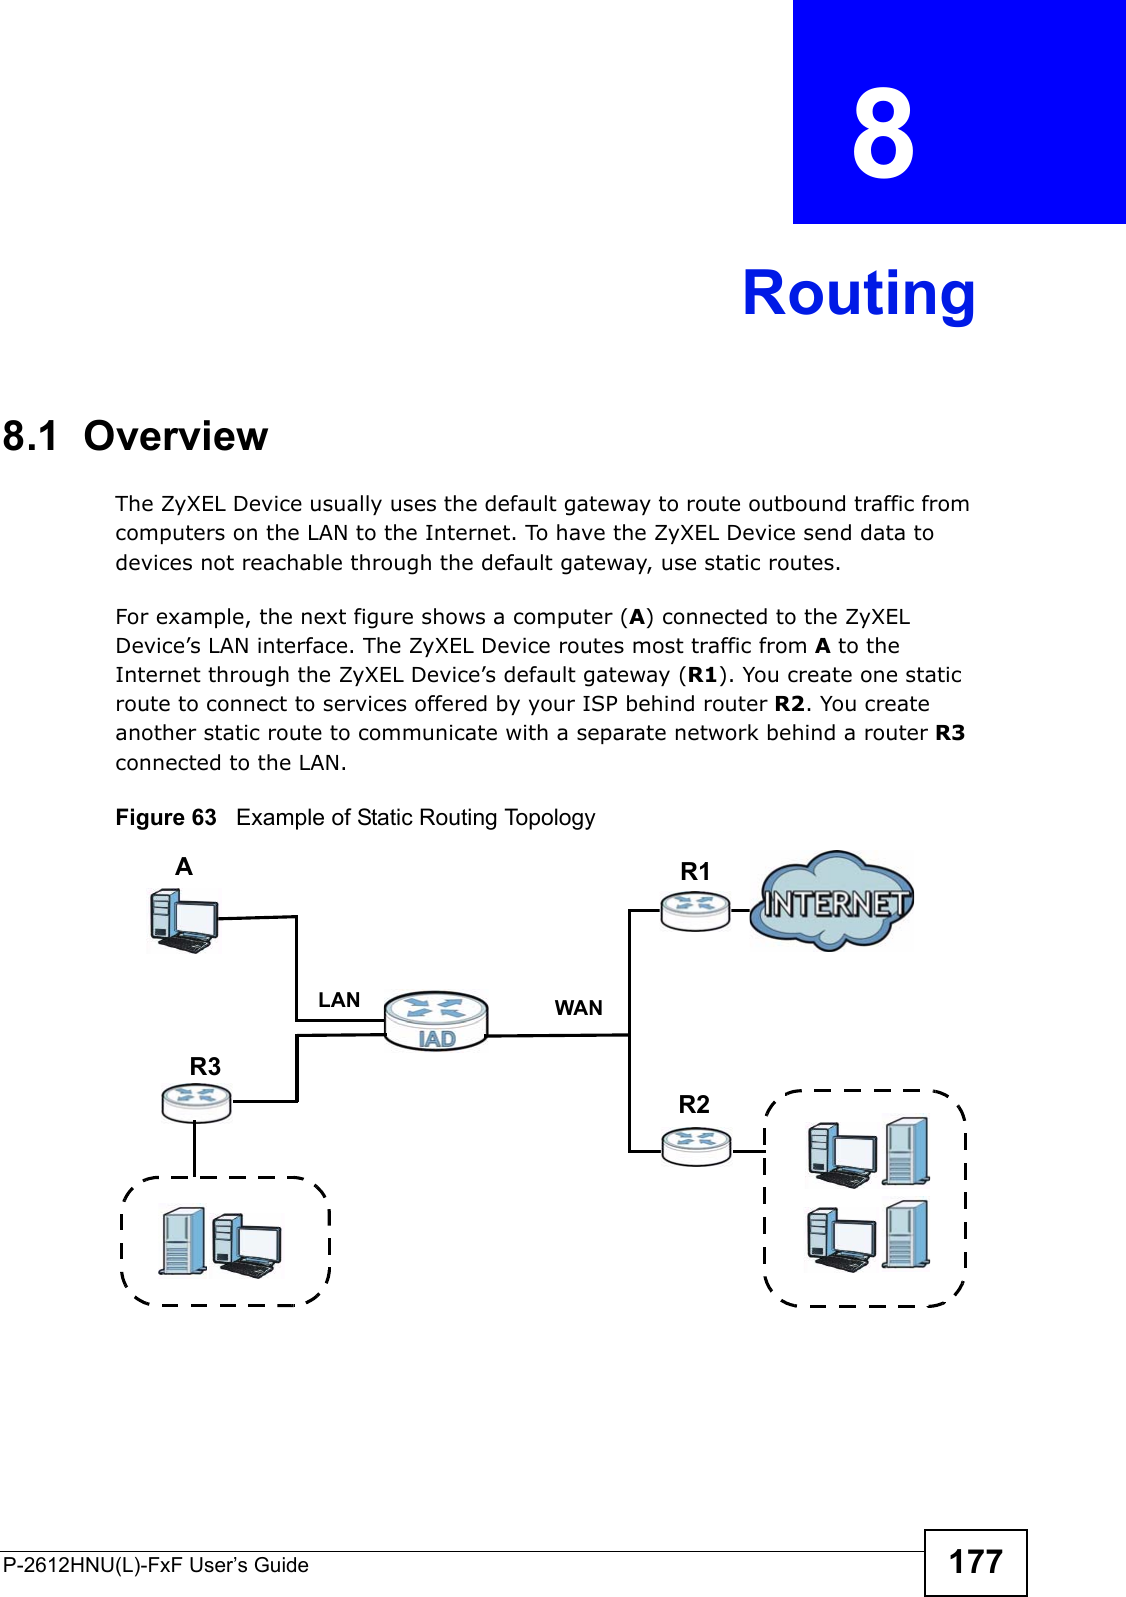 P-2612HNU(L)-FxF User’s Guide 177CHAPTER   8 Routing8.1  Overview   The ZyXEL Device usually uses the default gateway to route outbound traffic fromcomputers on the LAN to the Internet. To have the ZyXEL Device send data to devices not reachable through the default gateway, use static routes.For example, the next figure shows a computer (A) connected to the ZyXELDevice’s LAN interface. The ZyXEL Device routes most traffic from A to the Internet through the ZyXEL Device’s default gateway (R1). You create one static route to connect to services offered by your ISP behind router R2. You createanother static route to communicate with a separate network behind a router R3connected to the LAN.Figure 63   Example of Static Routing TopologyWANR1R2AR3LAN